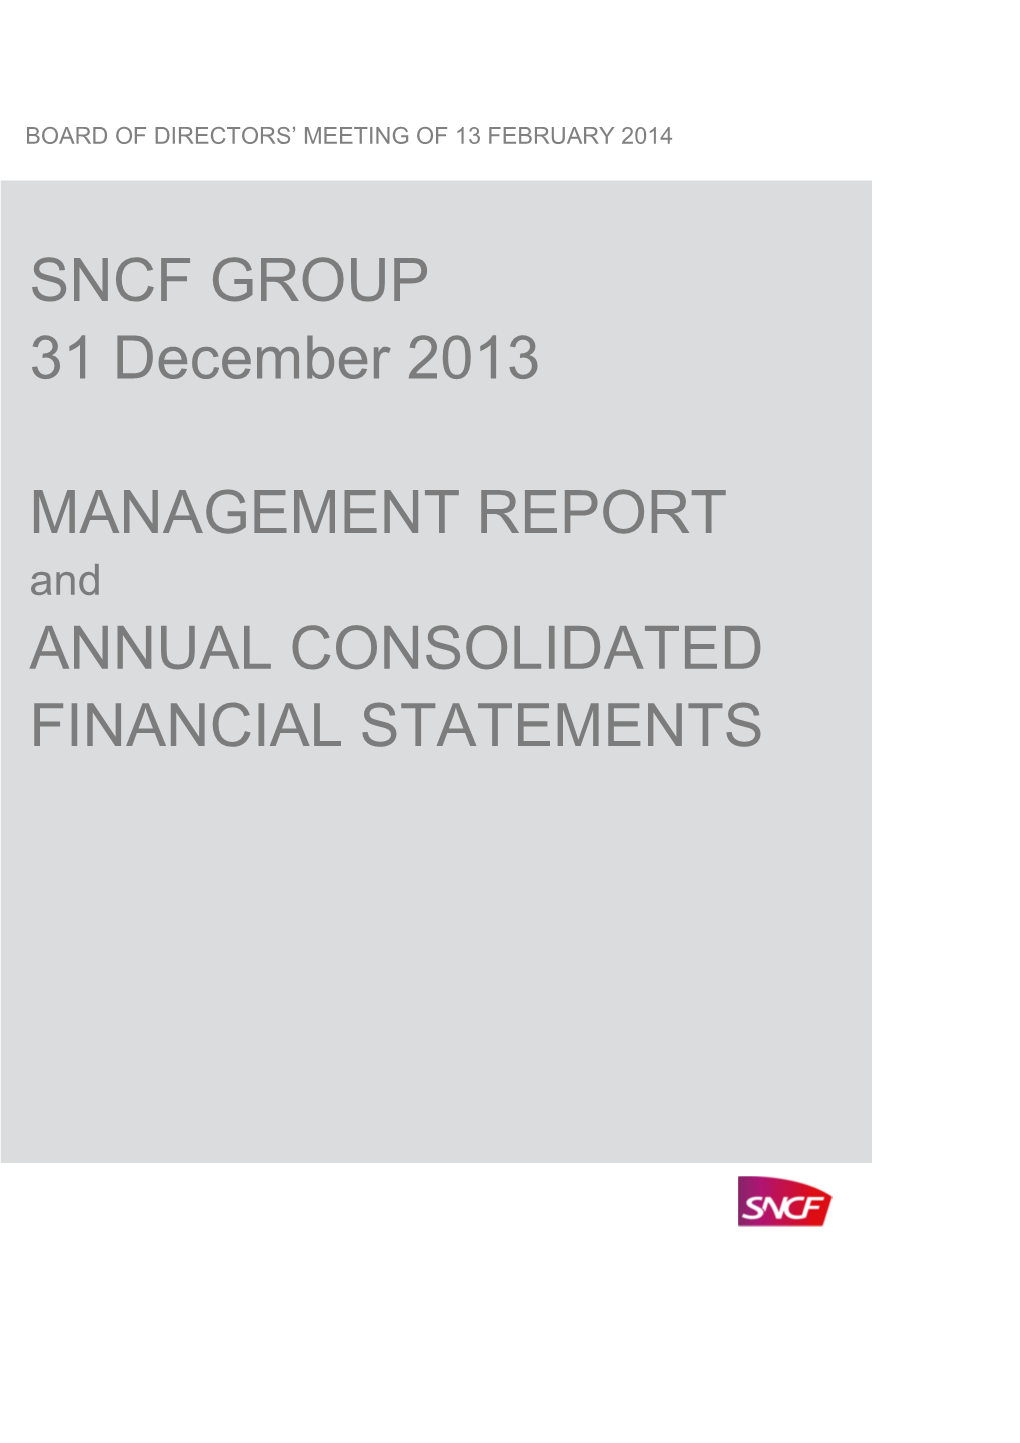 SNCF GROUP 31 December 2013 MANAGEMENT REPORT ANNUAL